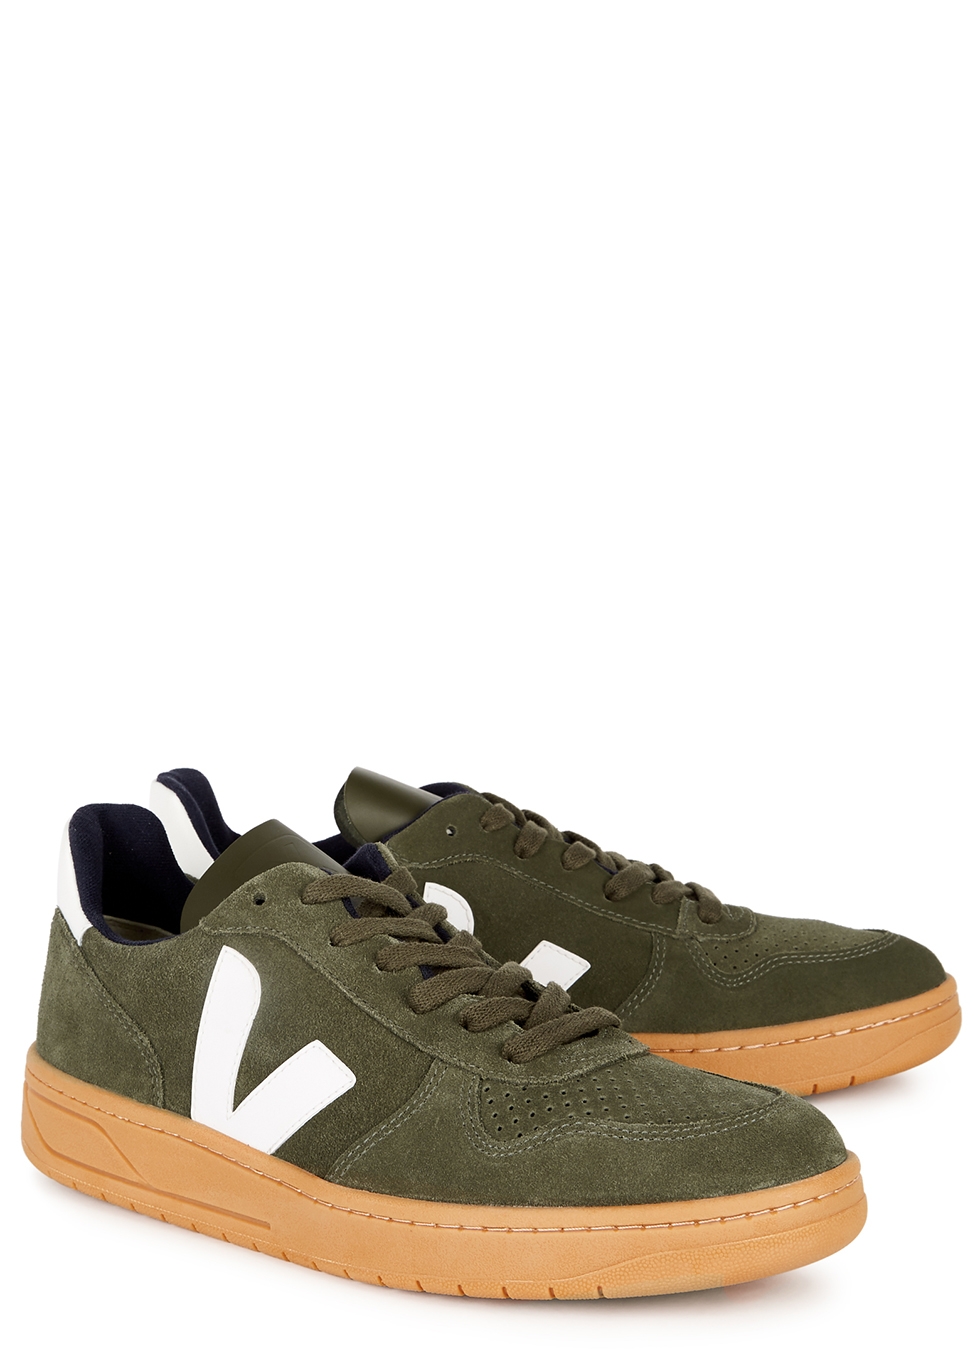 Veja V-10 army green suede sneakers 